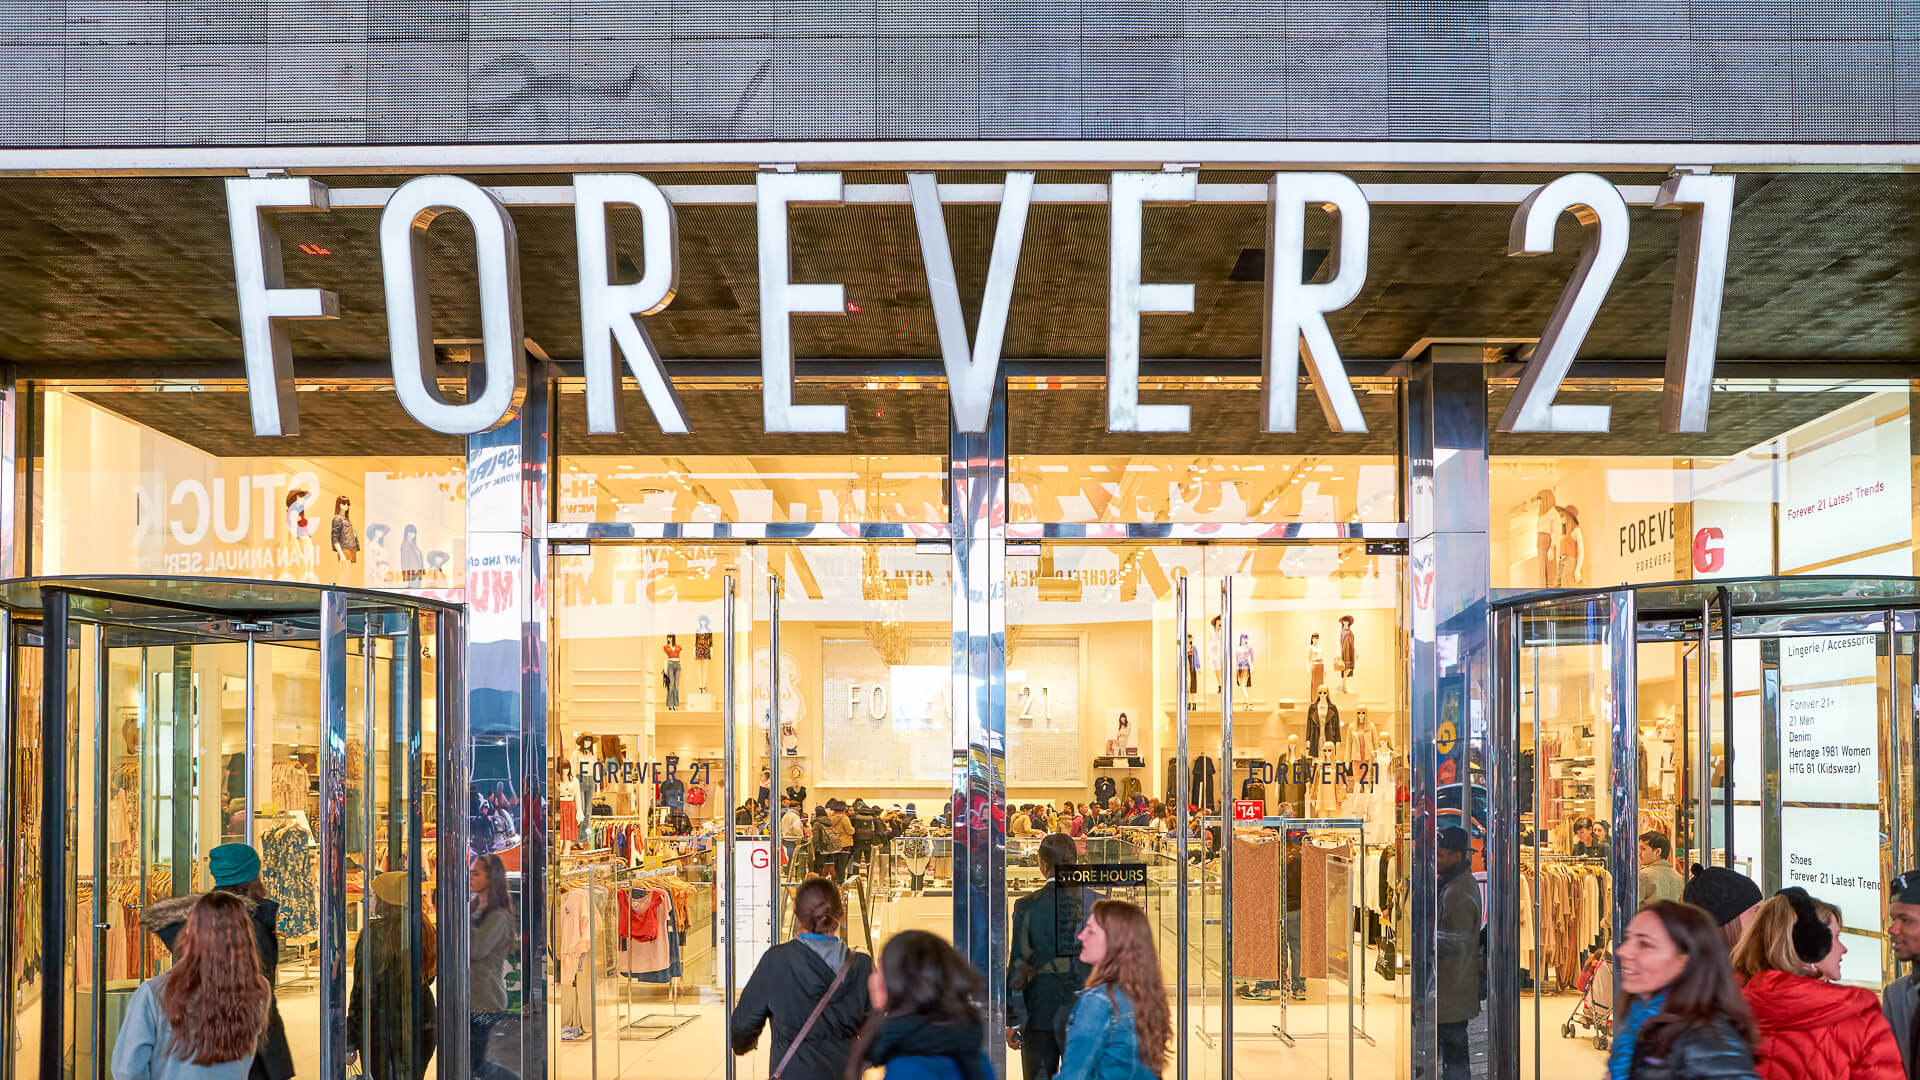 How To Make a Forever 21 Credit Card Payment